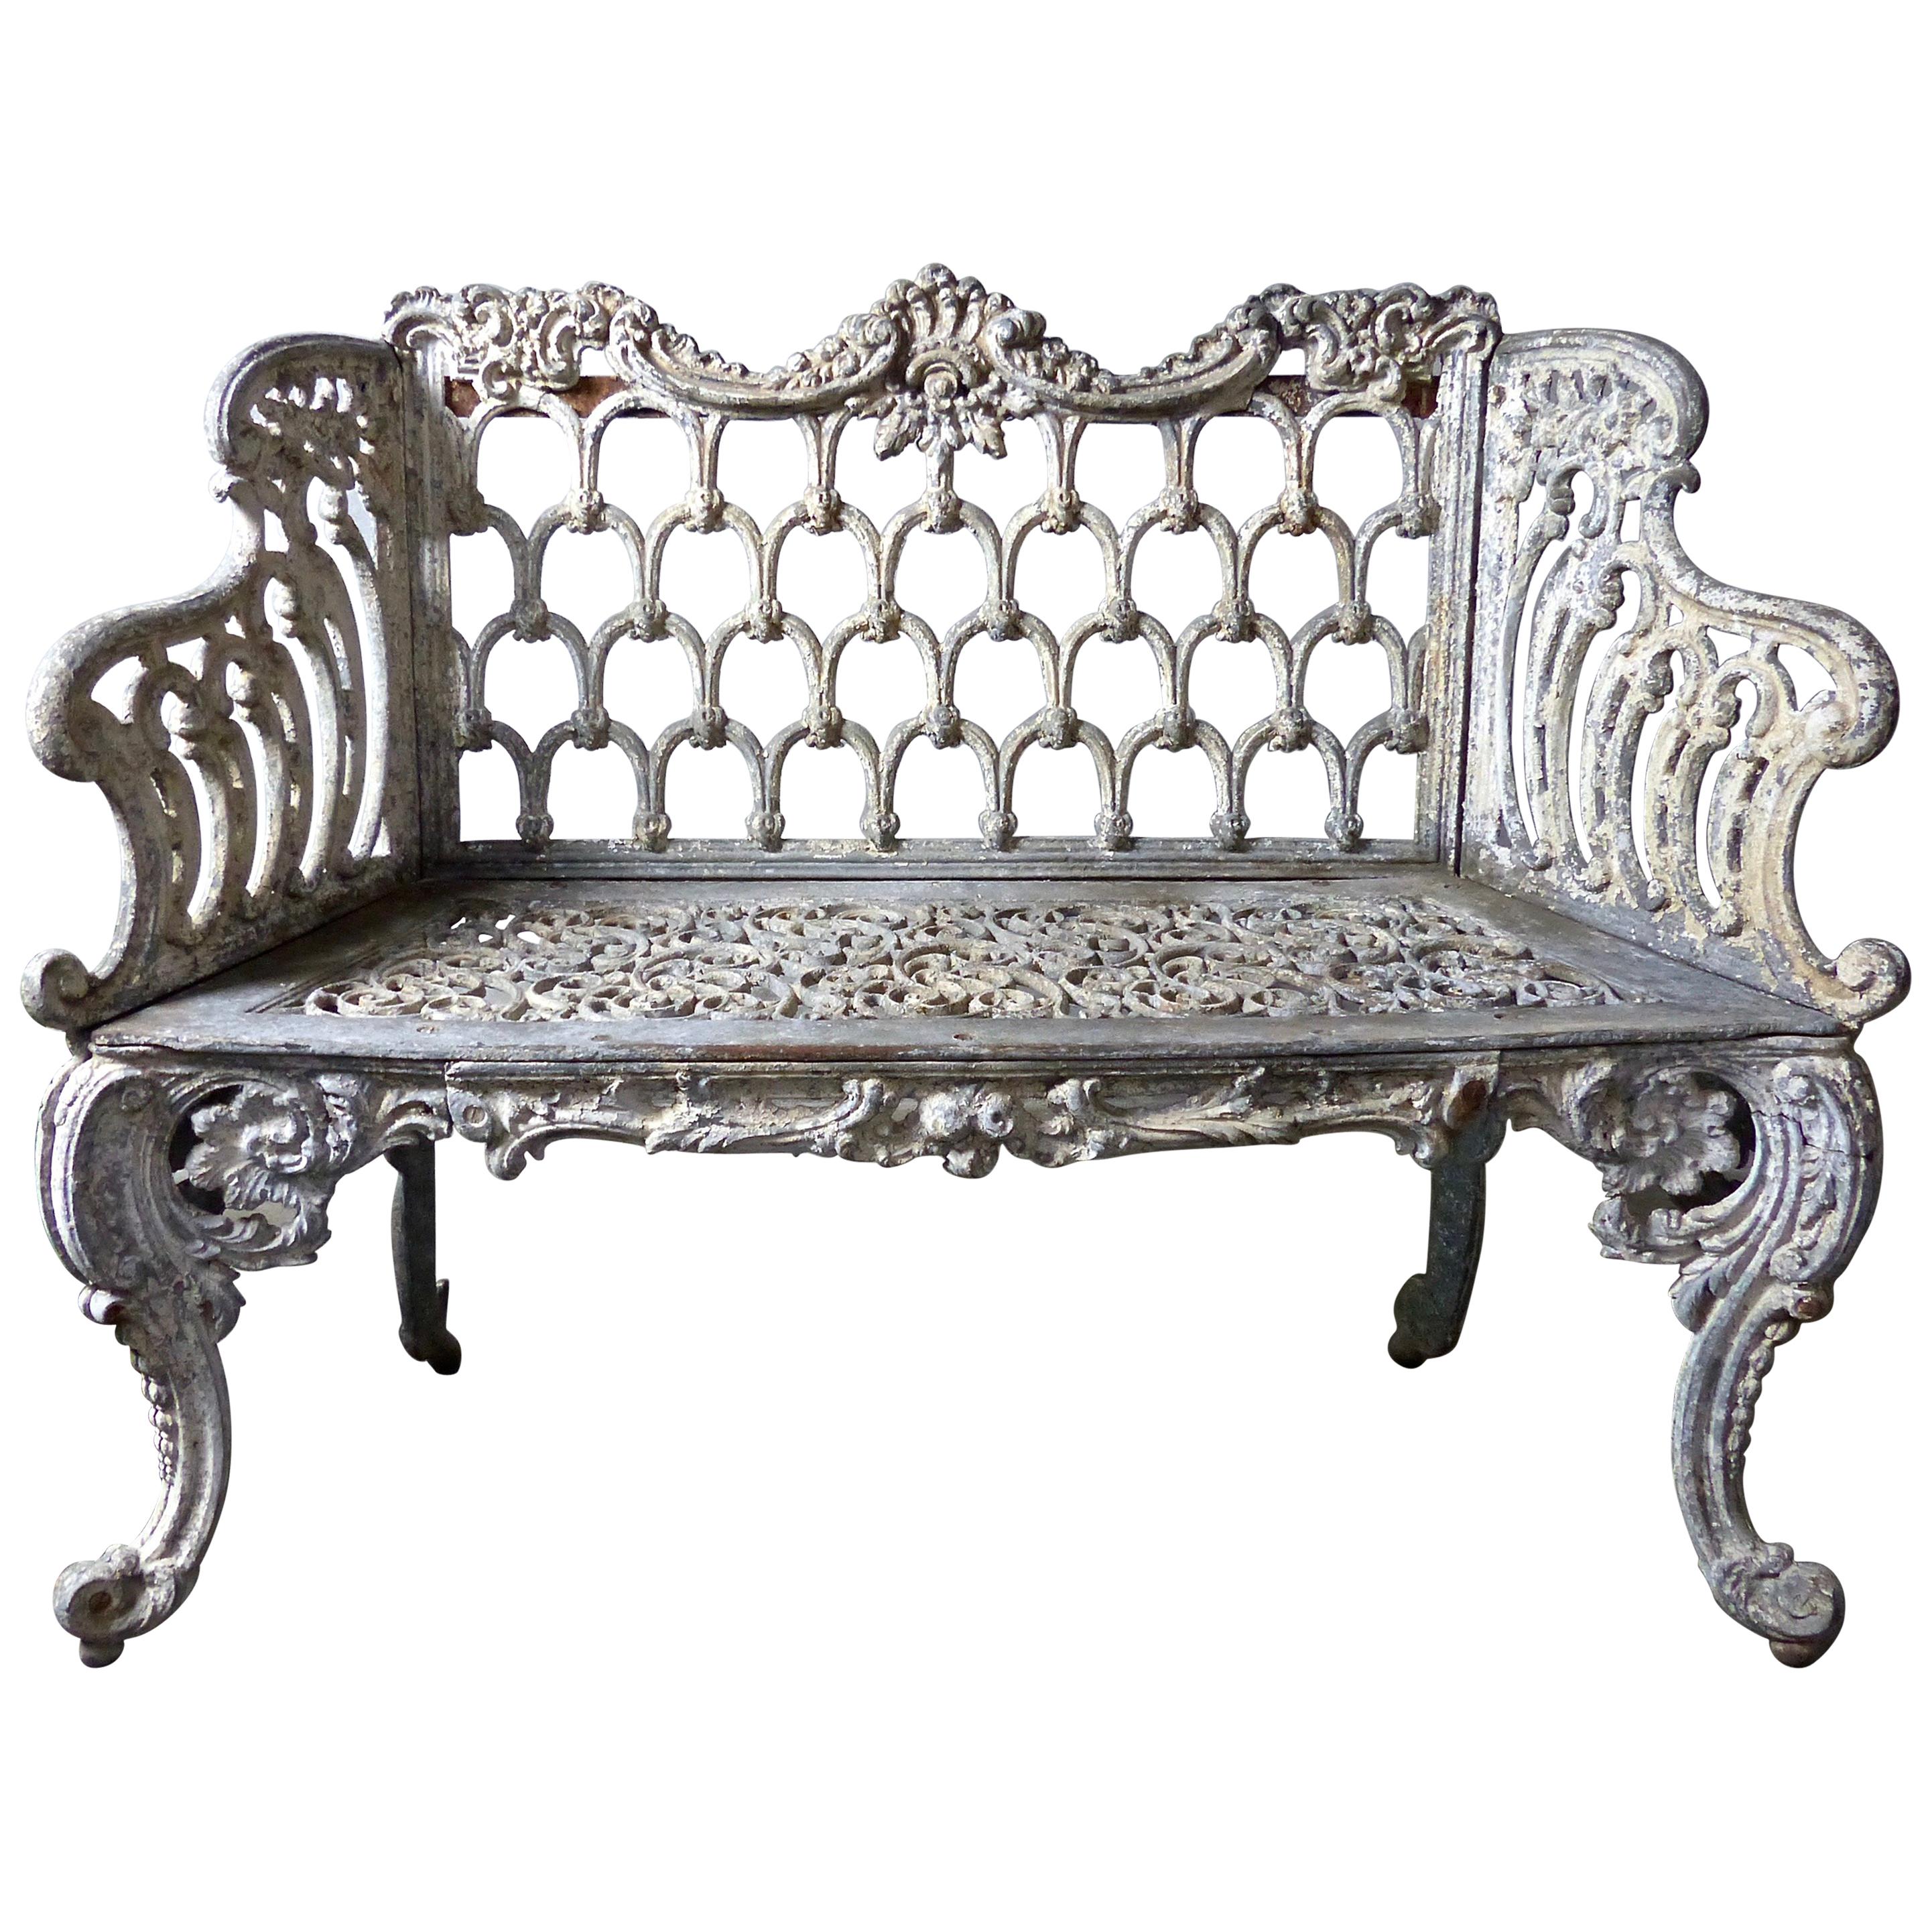 1890s Cast Iron White House American Garden Benches 'Pair'